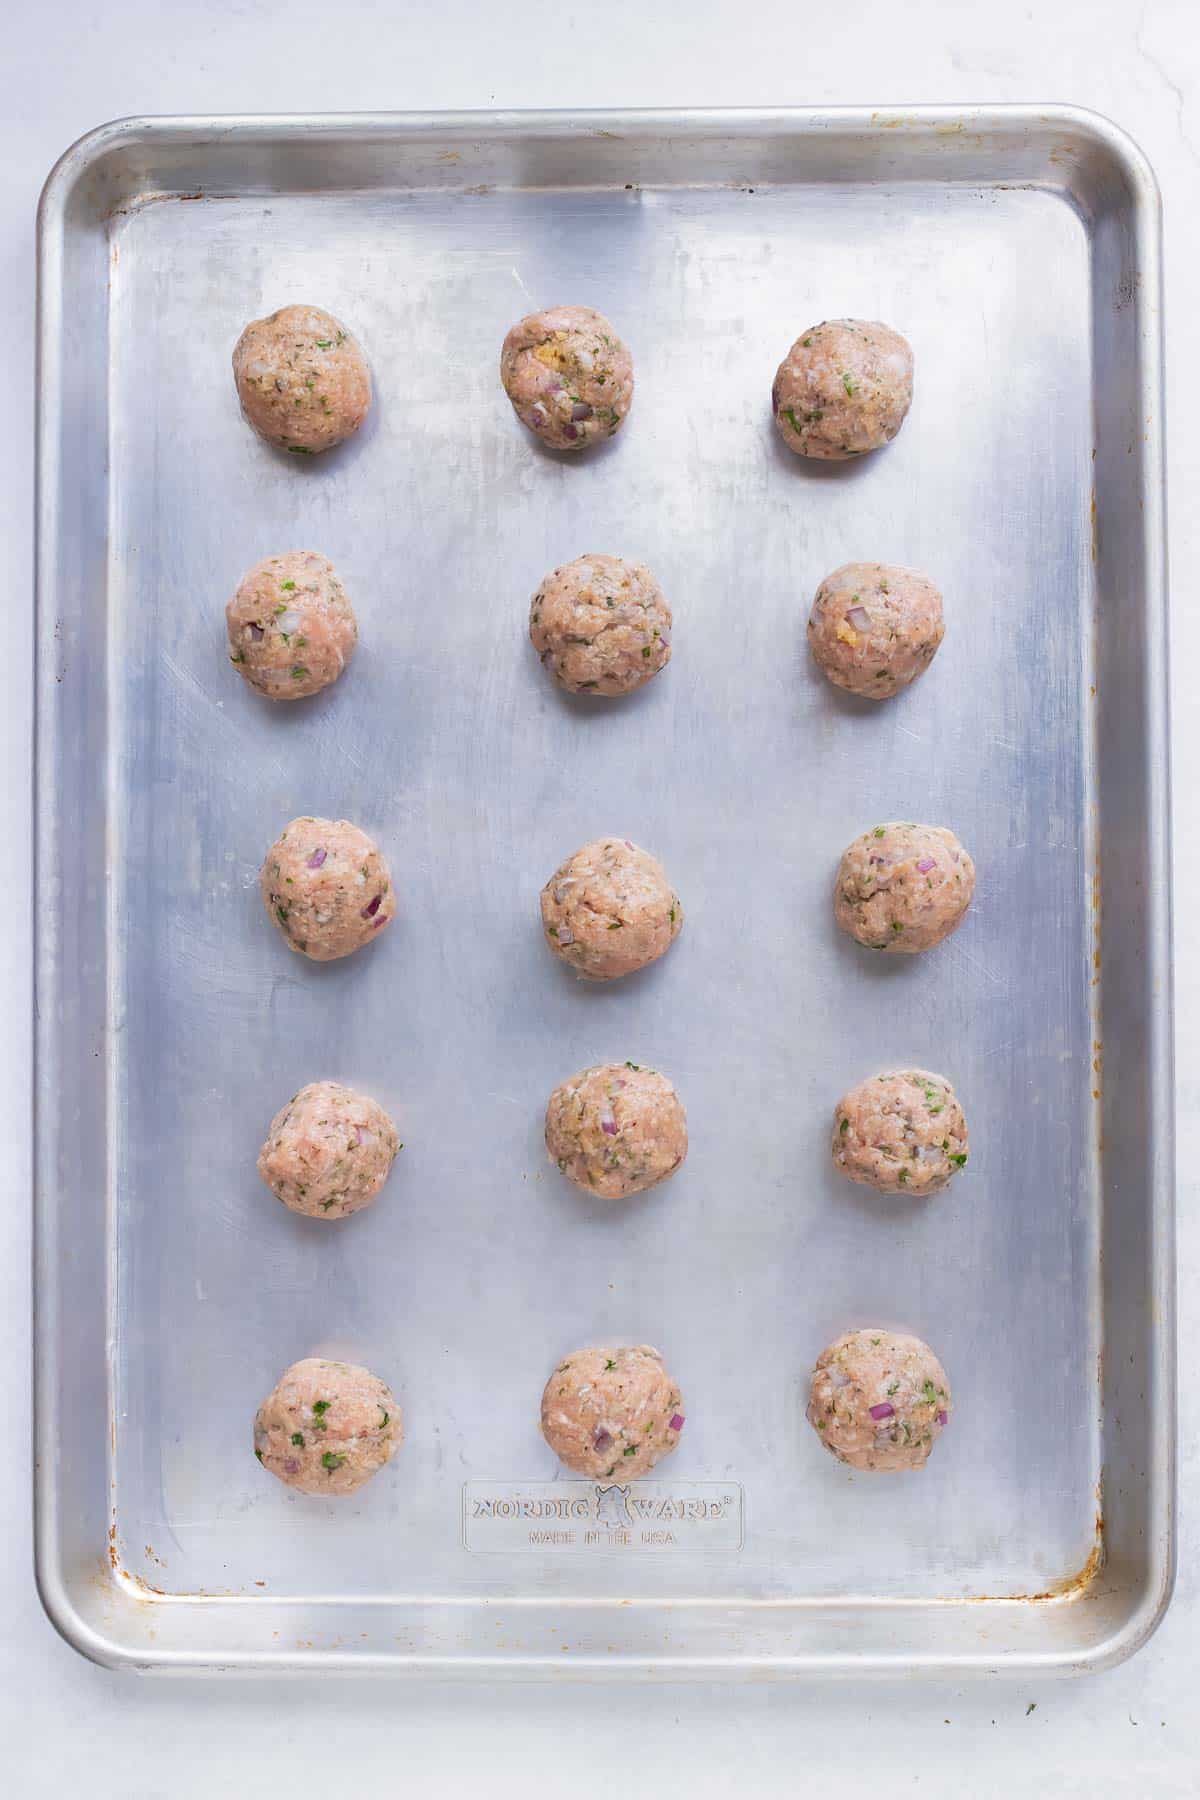 The turkey meatballs are spaced apart on a large baking sheet before being cooked in the oven.